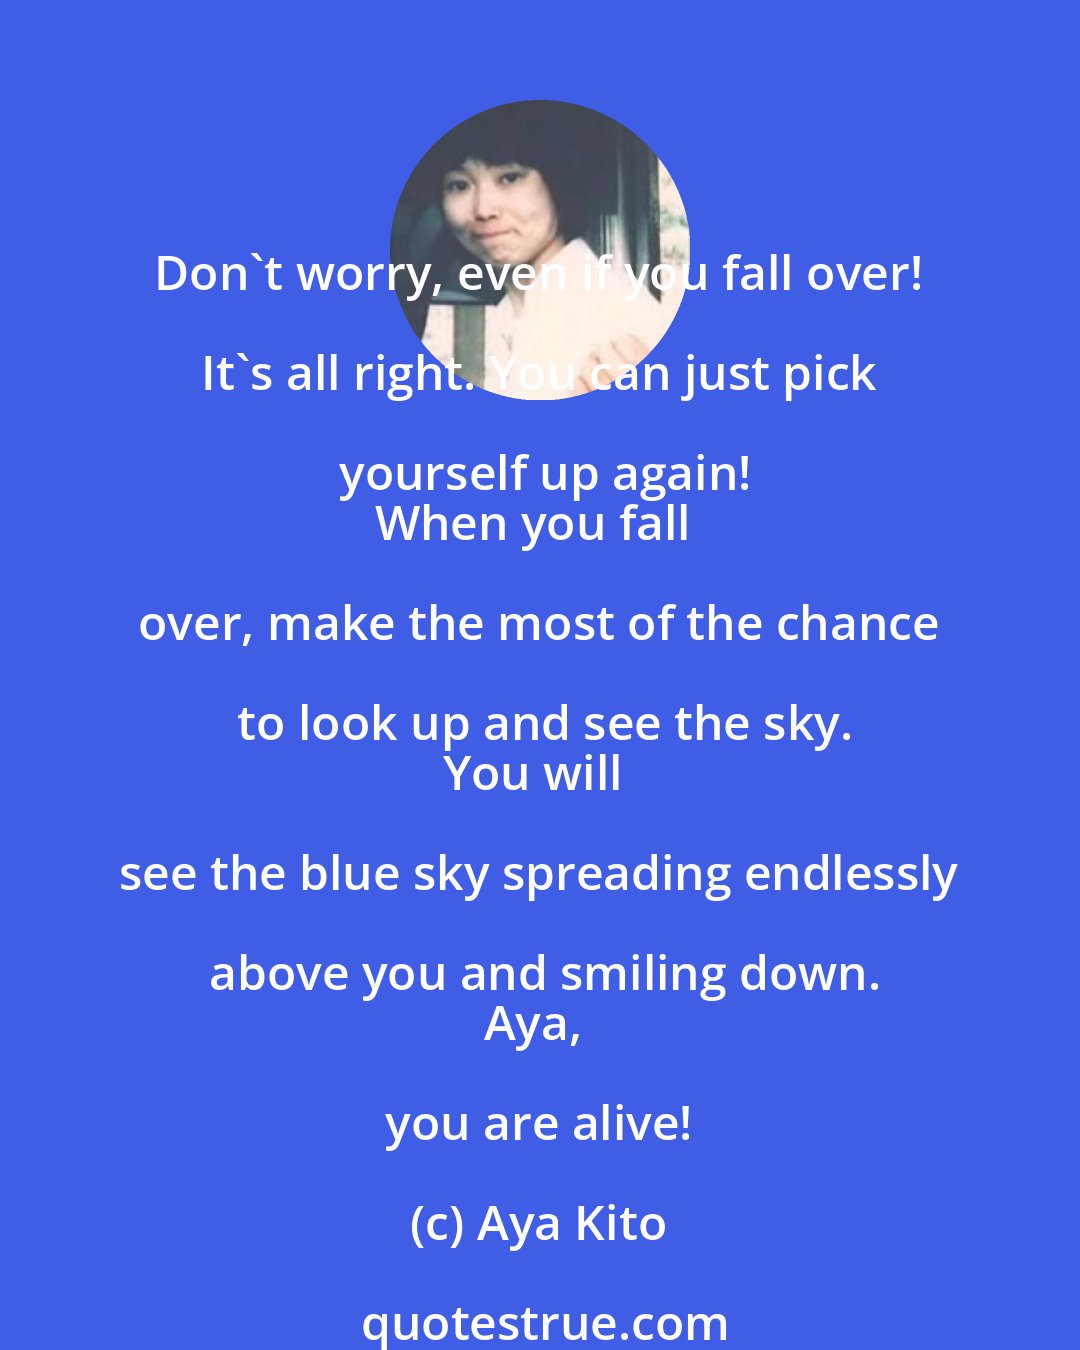 Aya Kito: Don't worry, even if you fall over! It's all right. You can just pick yourself up again!
When you fall over, make the most of the chance to look up and see the sky.
You will see the blue sky spreading endlessly above you and smiling down.
Aya, you are alive!